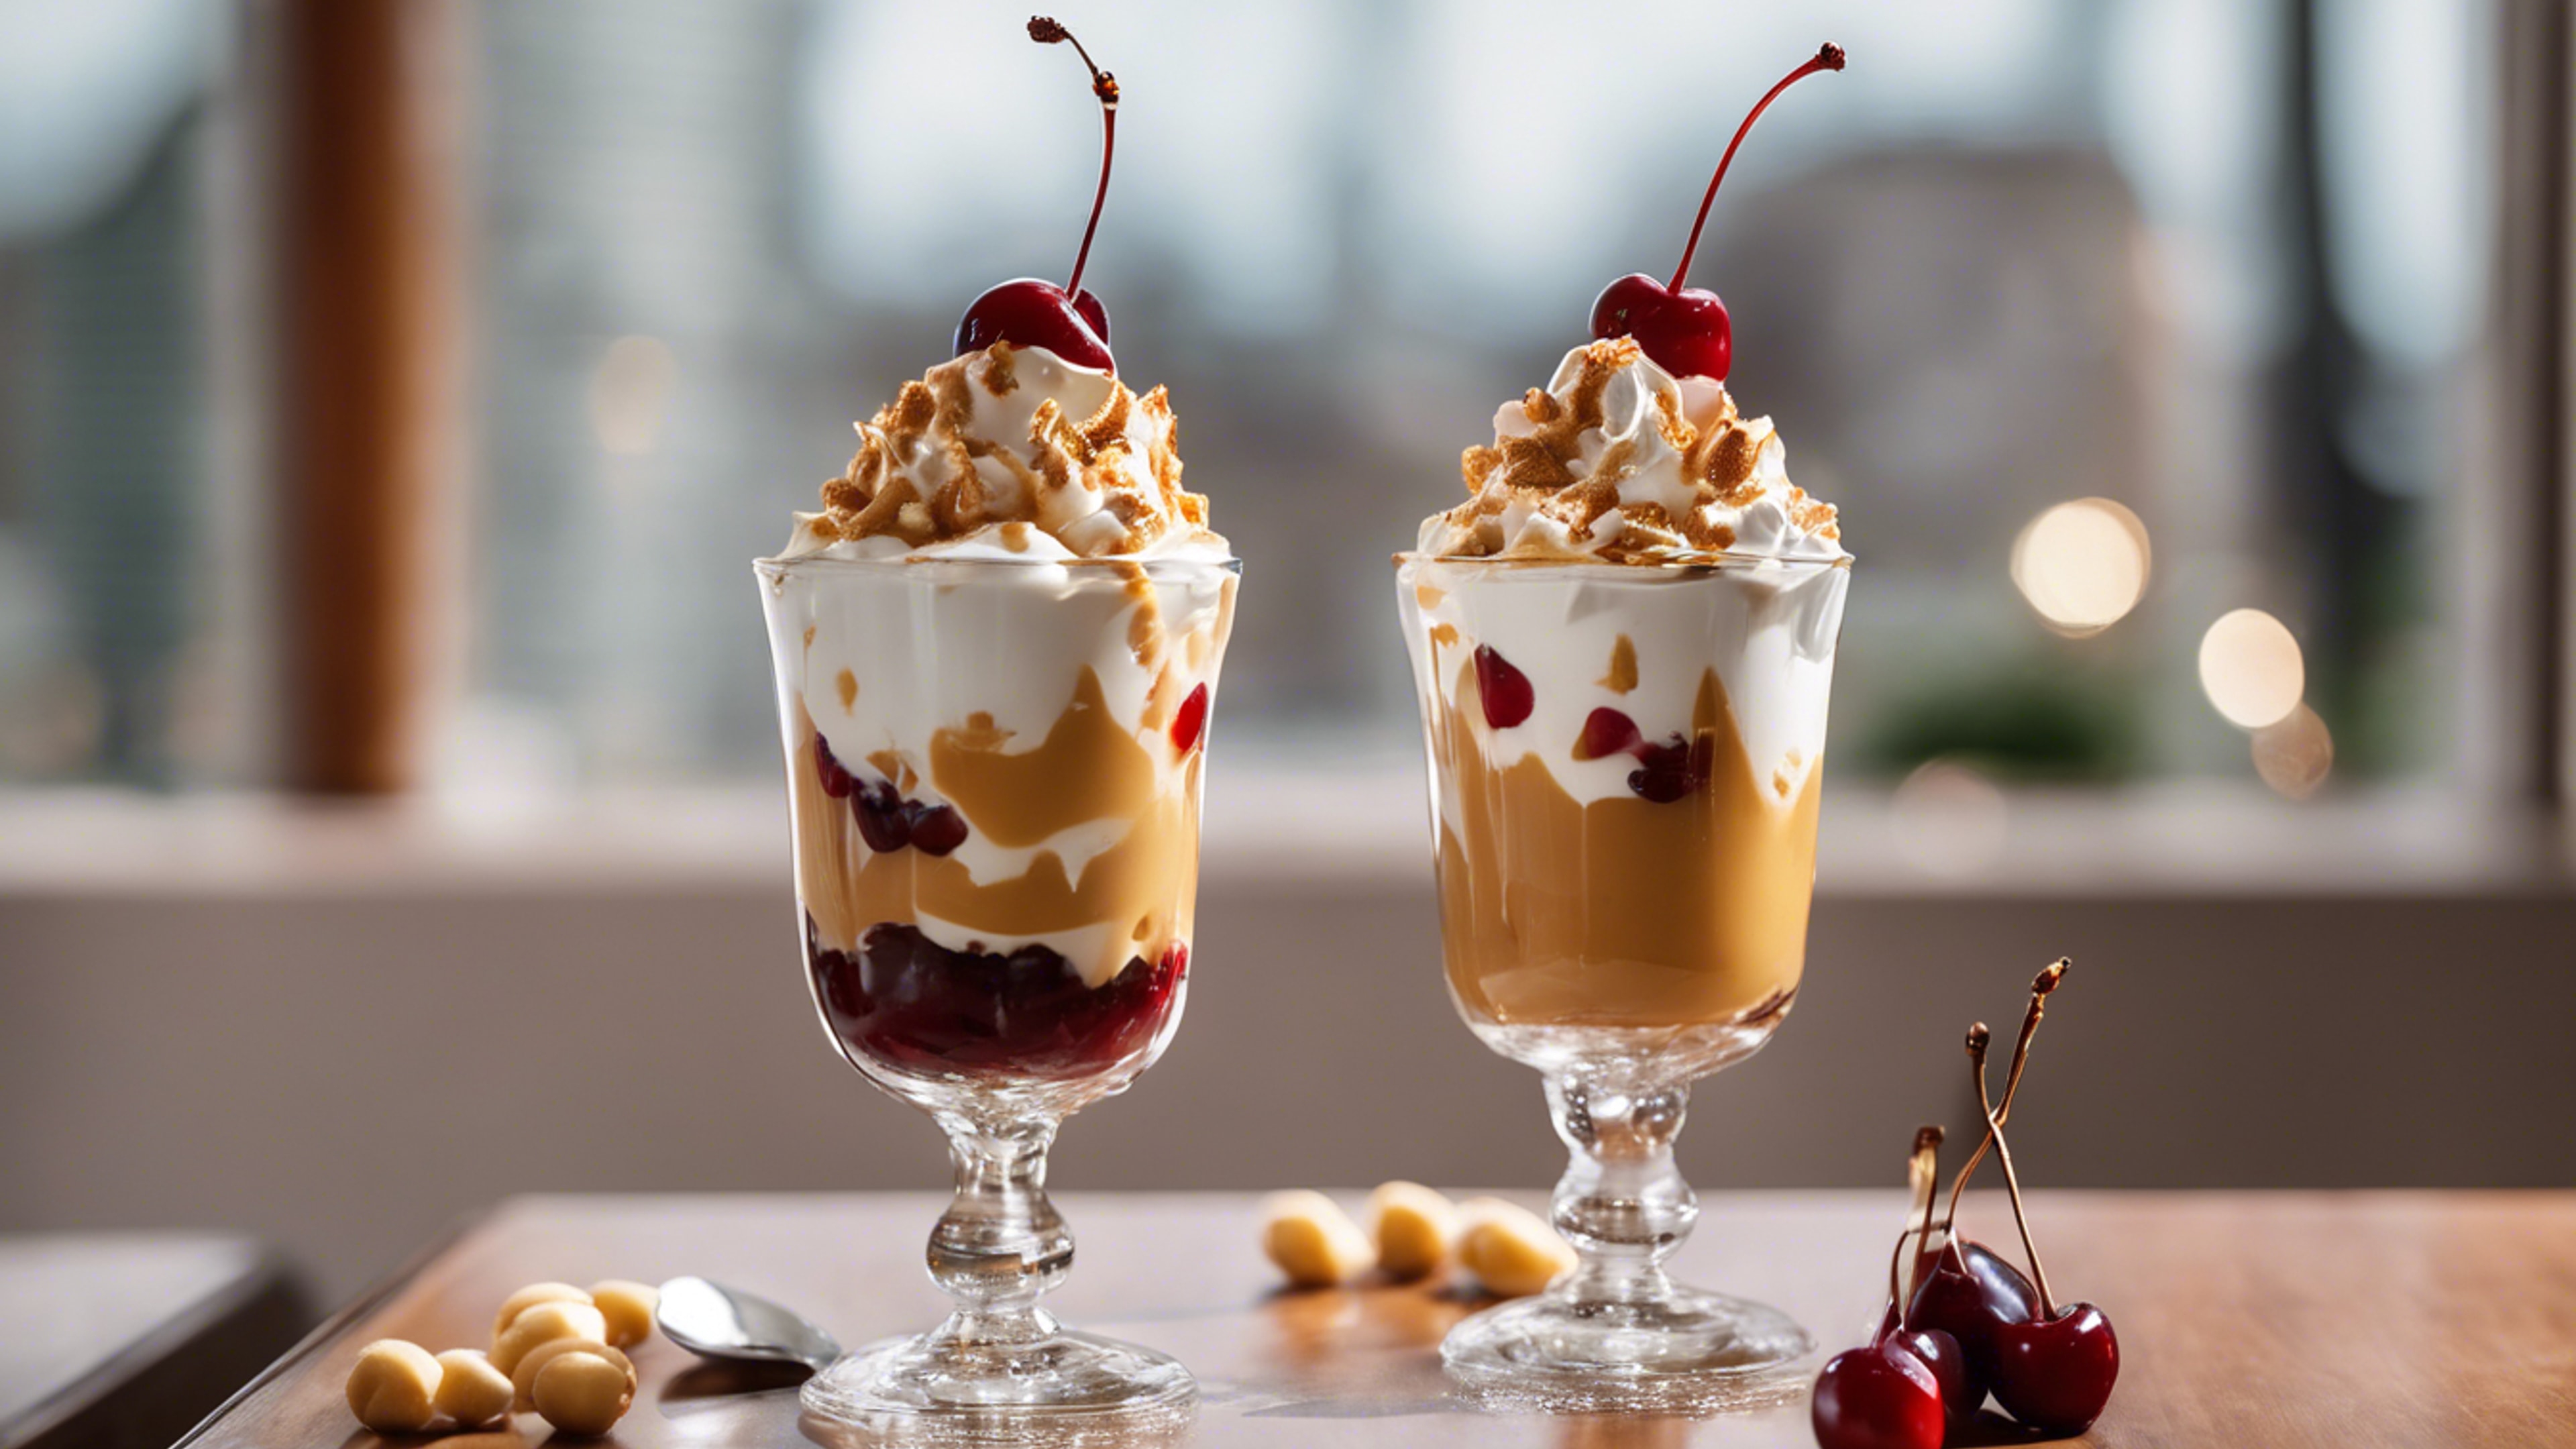 A butterscotch sundae with whipped cream and a cherry, served in a tall glass.壁紙[5dd651b3c7584e83b6bc]